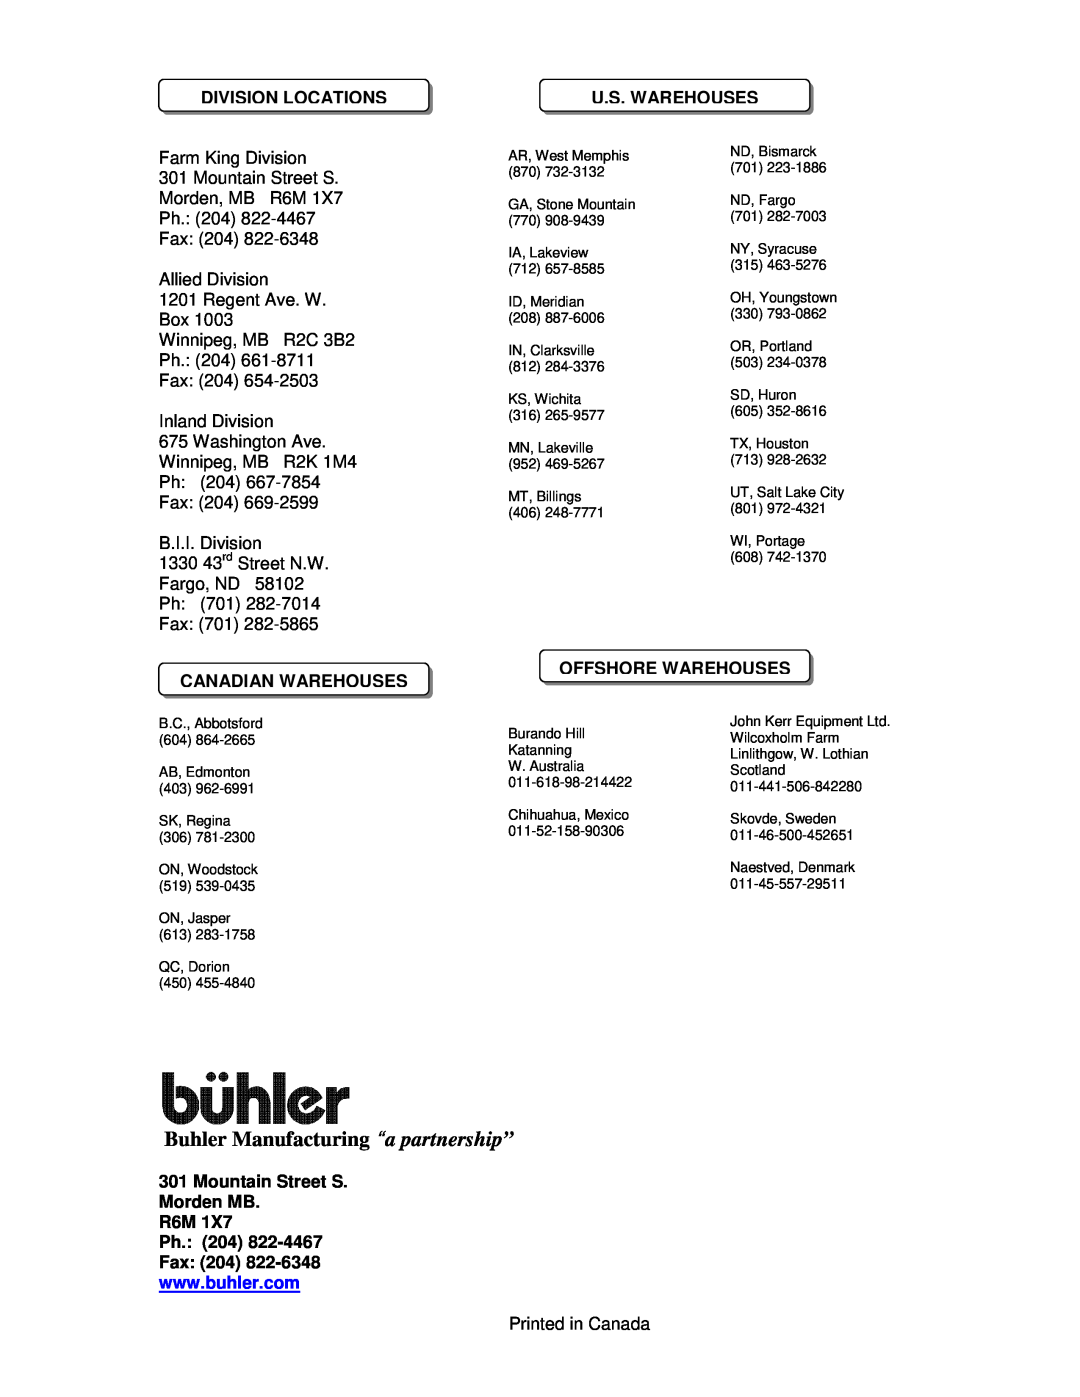 Buhler FK314 Buhler Manufacturing “a partnership”, Division Locations, Ph. 204 Fax 204 Inland Division 675 Washington Ave 